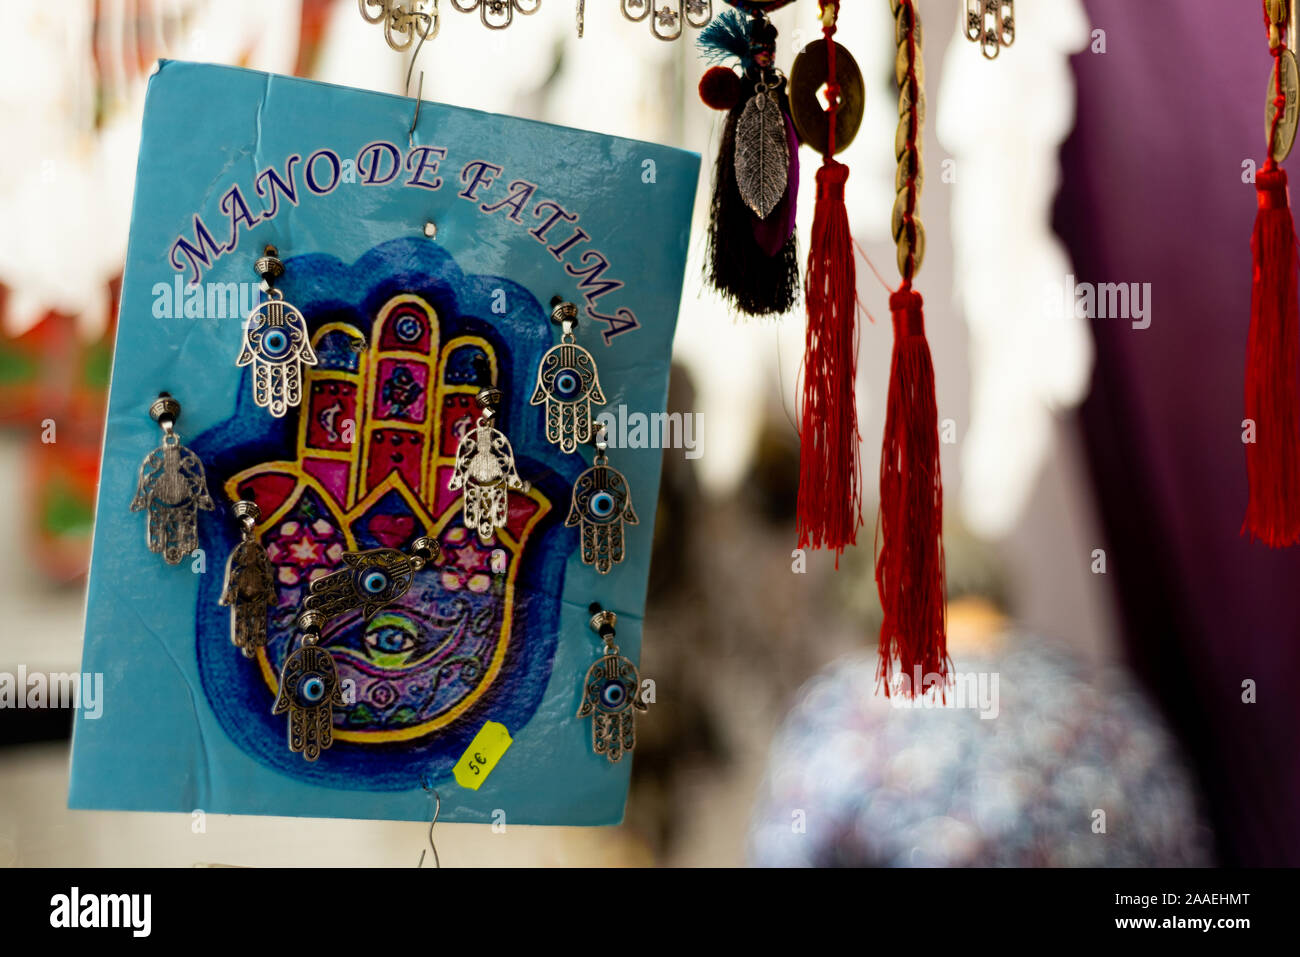 jamsa hand amulet earrings and pendants for sale in street market stall, a symbol of superstition and search for luck and protection Stock Photo